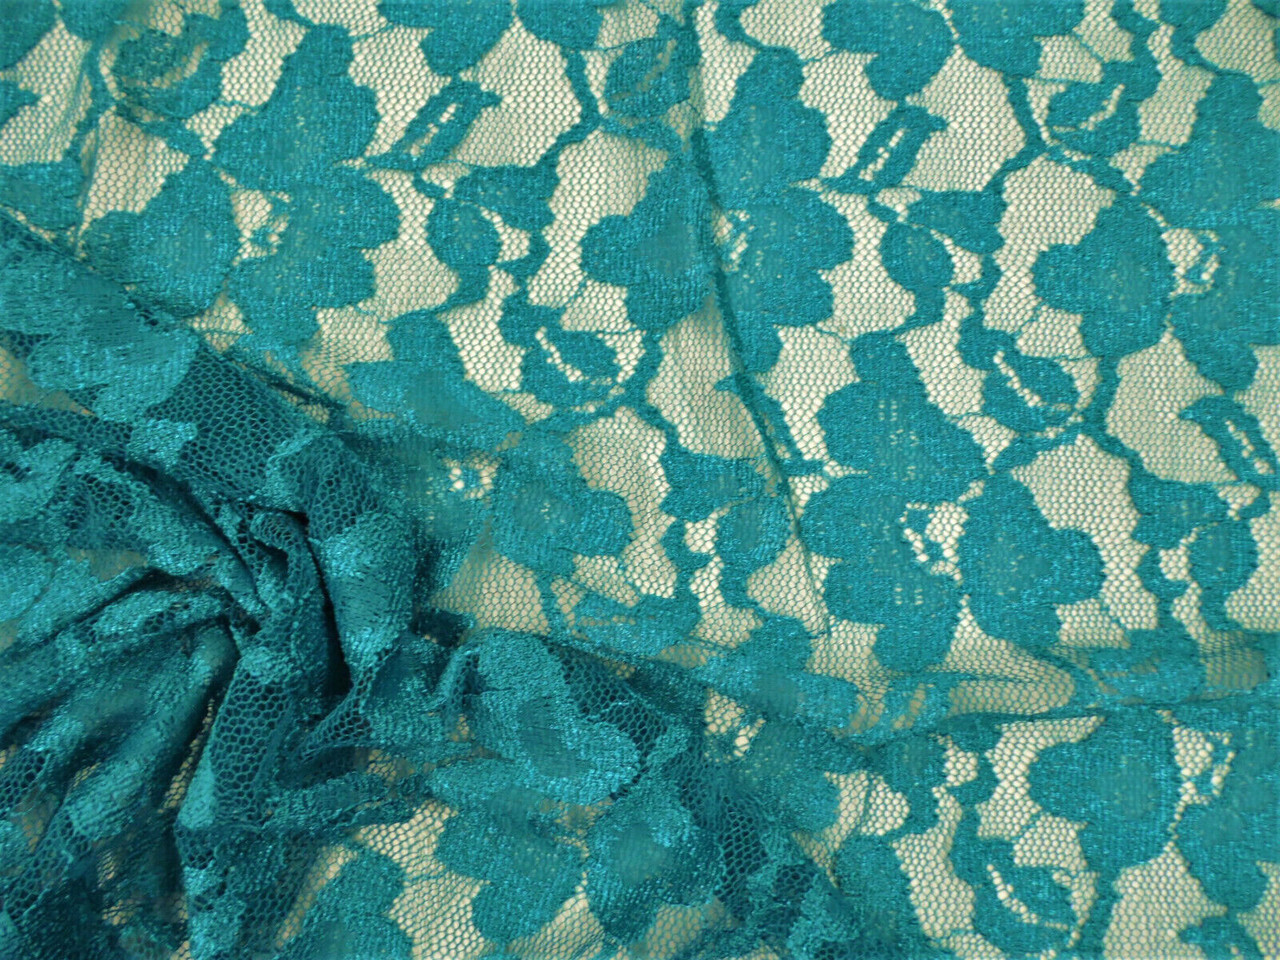 Embroidered Stretch Lace Apparel Fabric Sheer Metallic Floral Teal XX211